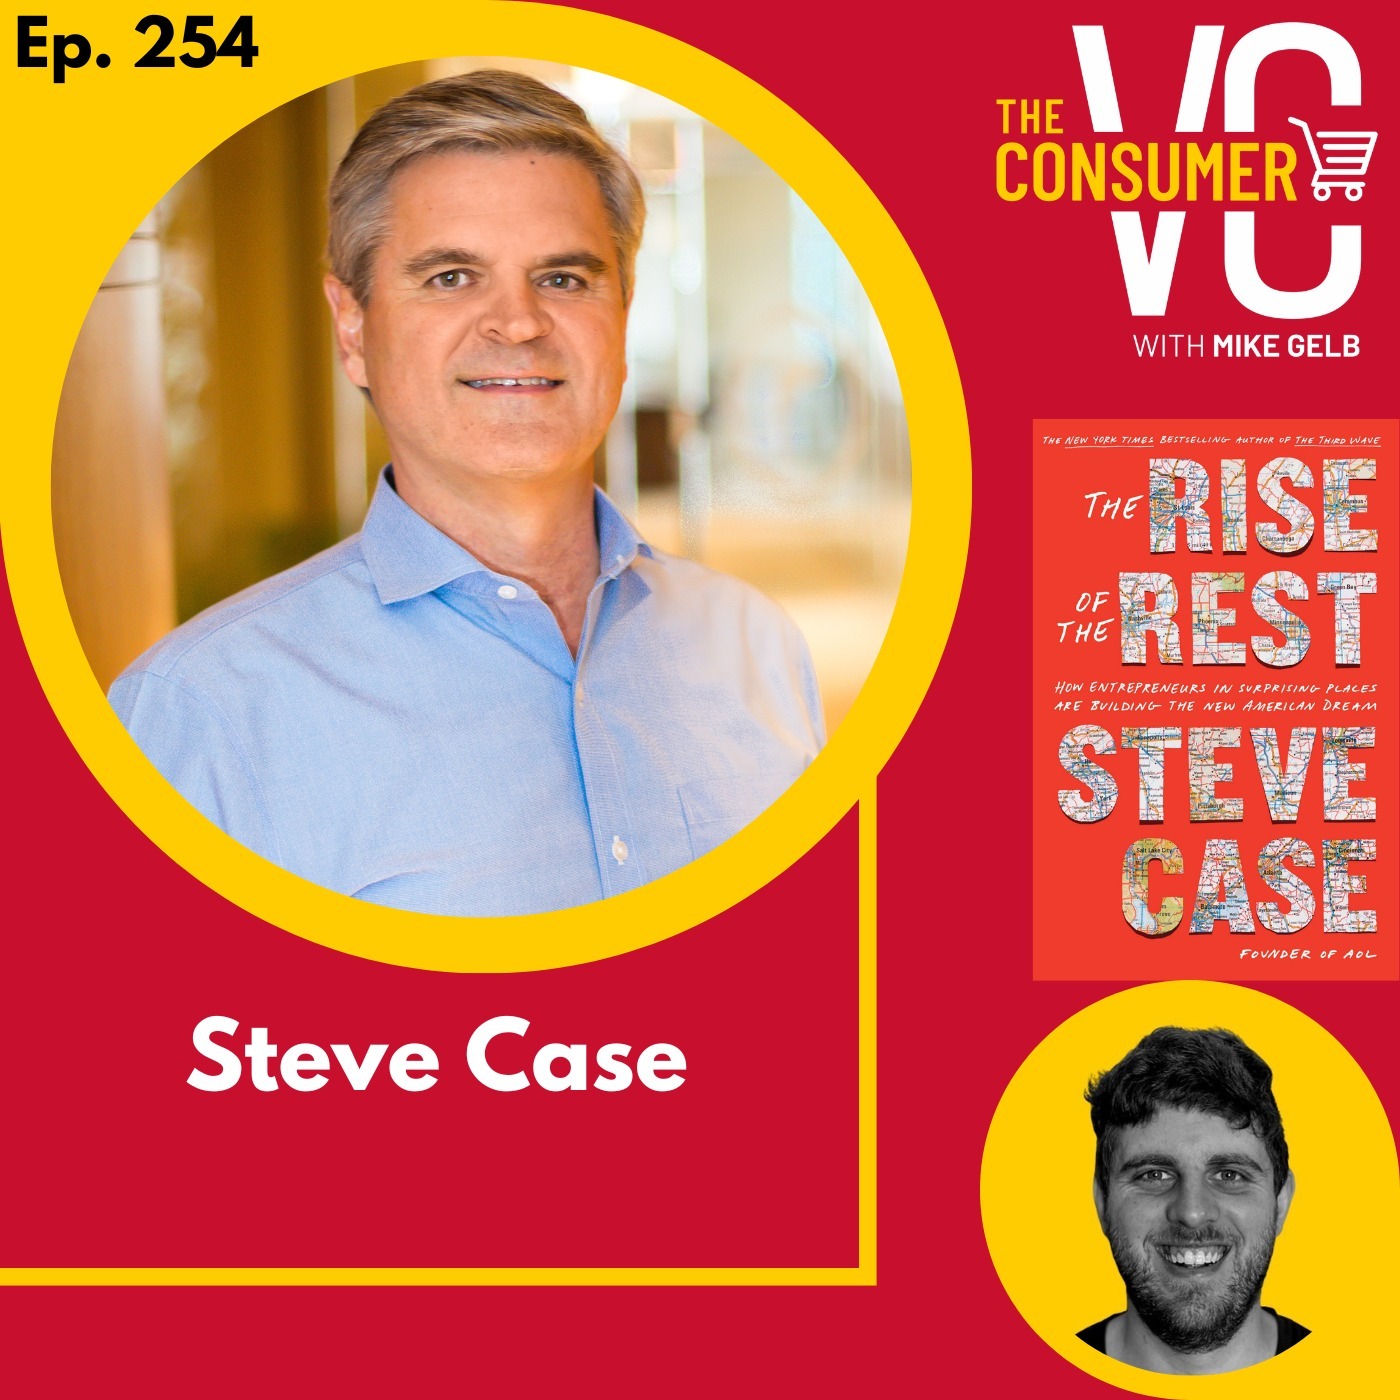 Steve Case (AOL, Revolution & Rise of the Rest) - Why He's Optimistic About Innovation in Secondary and Tertiary American Cities